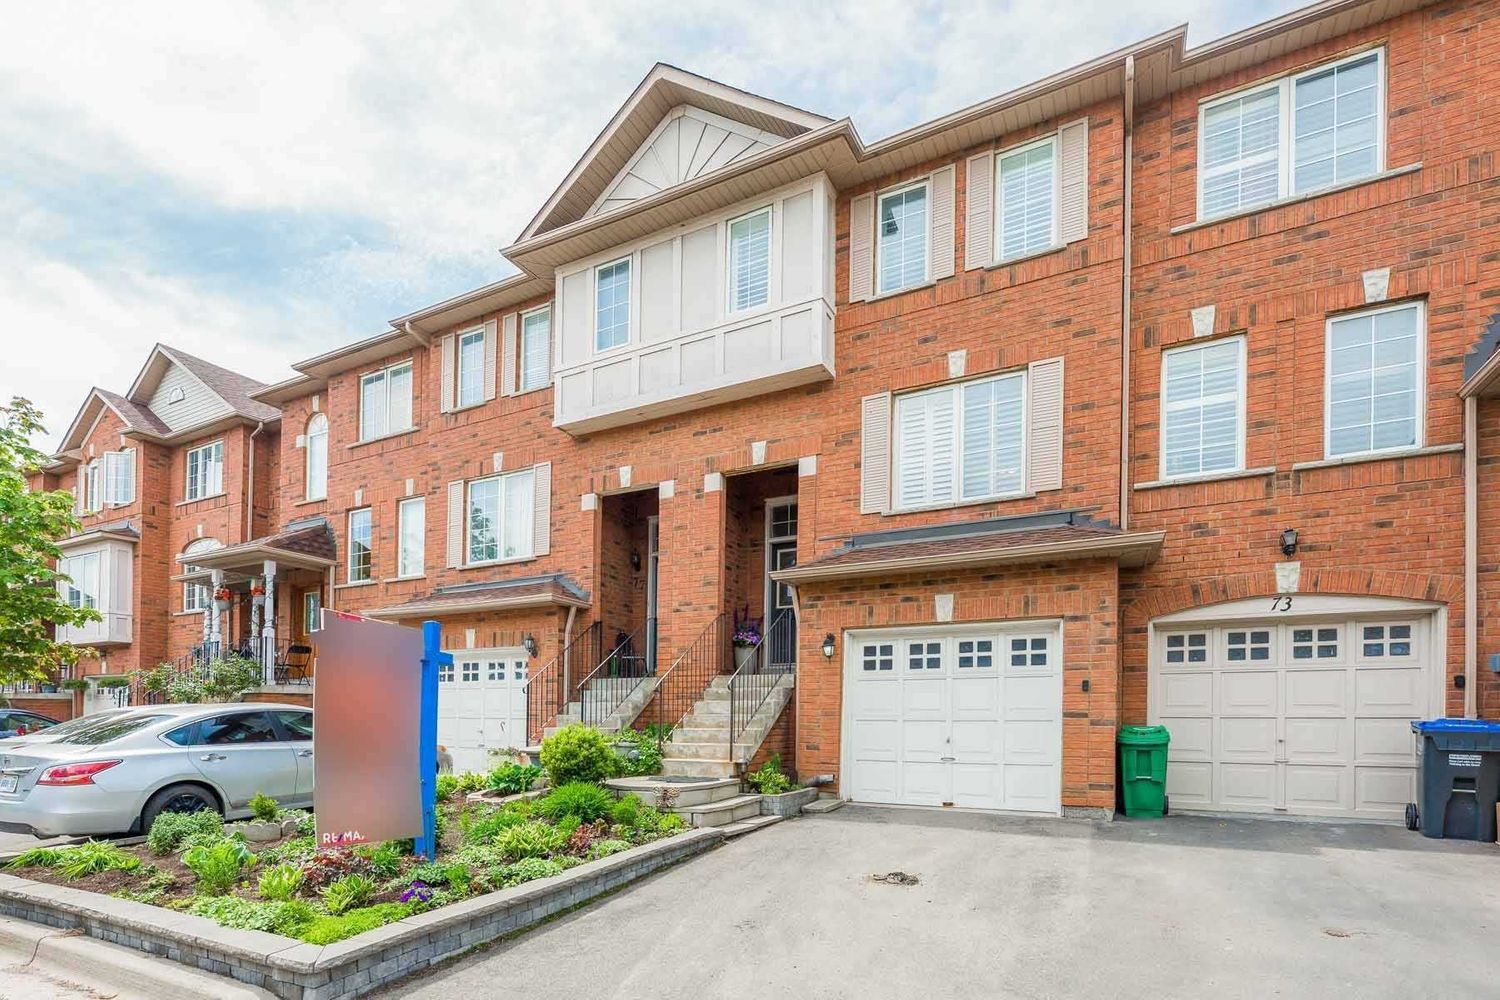 170 Havelock Drive. 170 Havelock Dr Townhomes is located in  Brampton, Toronto - image #2 of 2